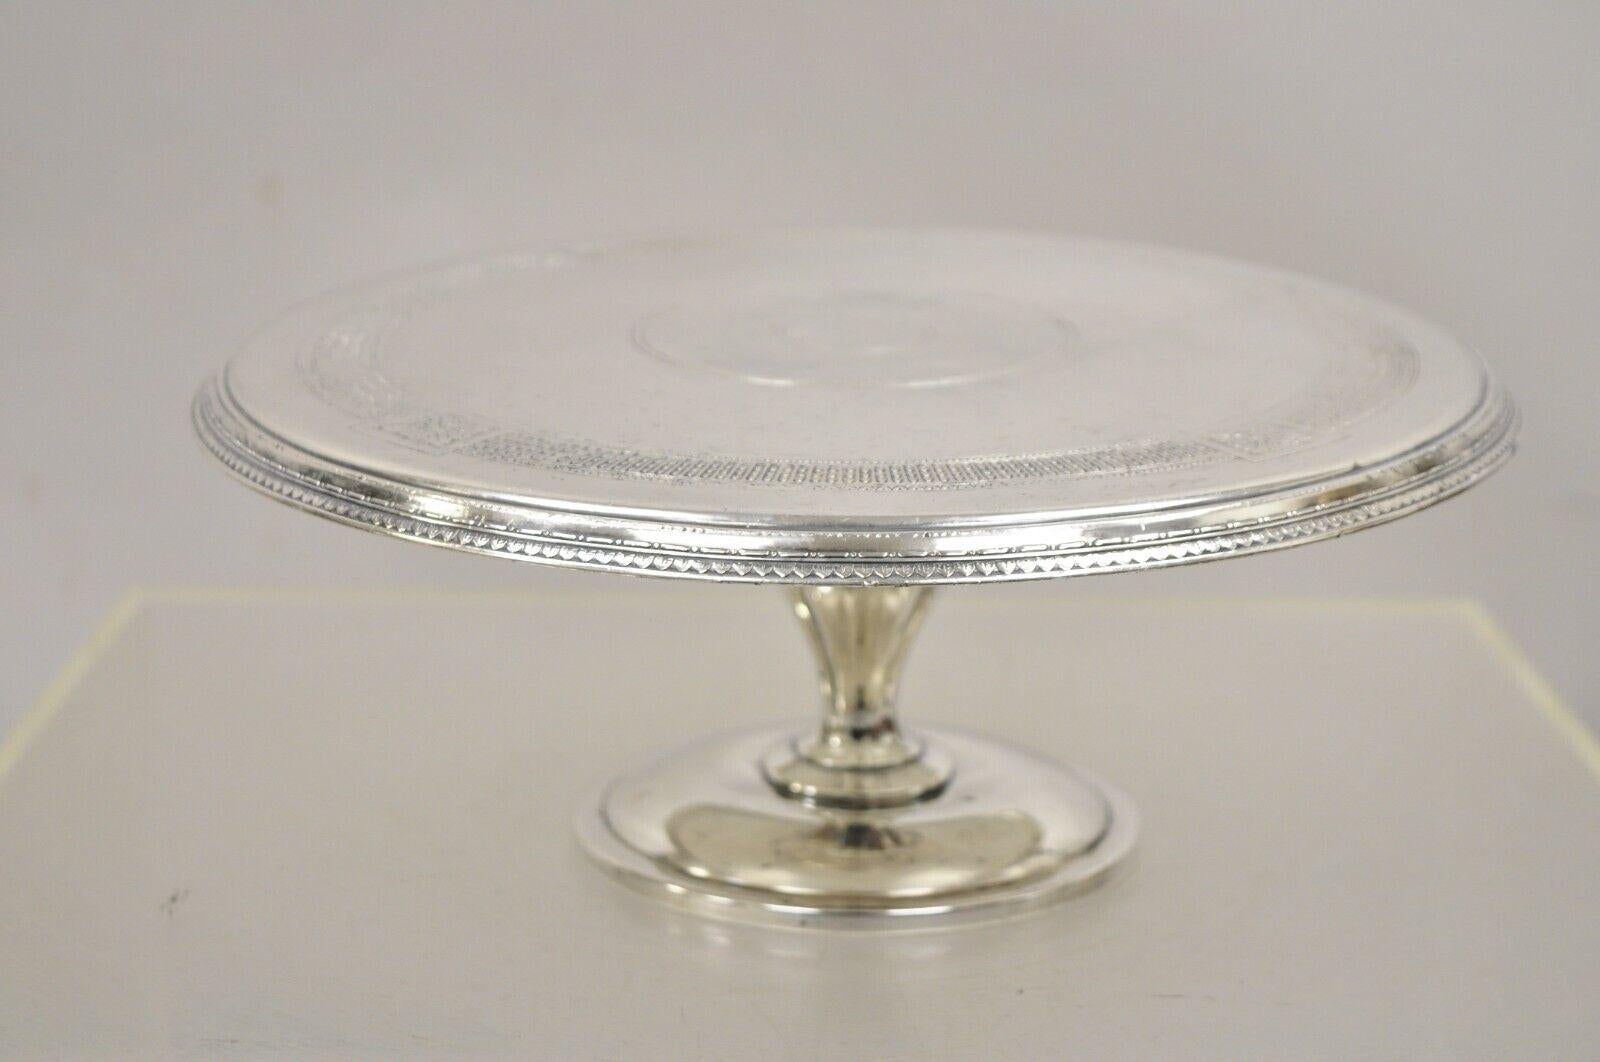 Pairpoint Antique Edwardian Silver Plated Pedestal Base Cake Stand Platter Plate 7